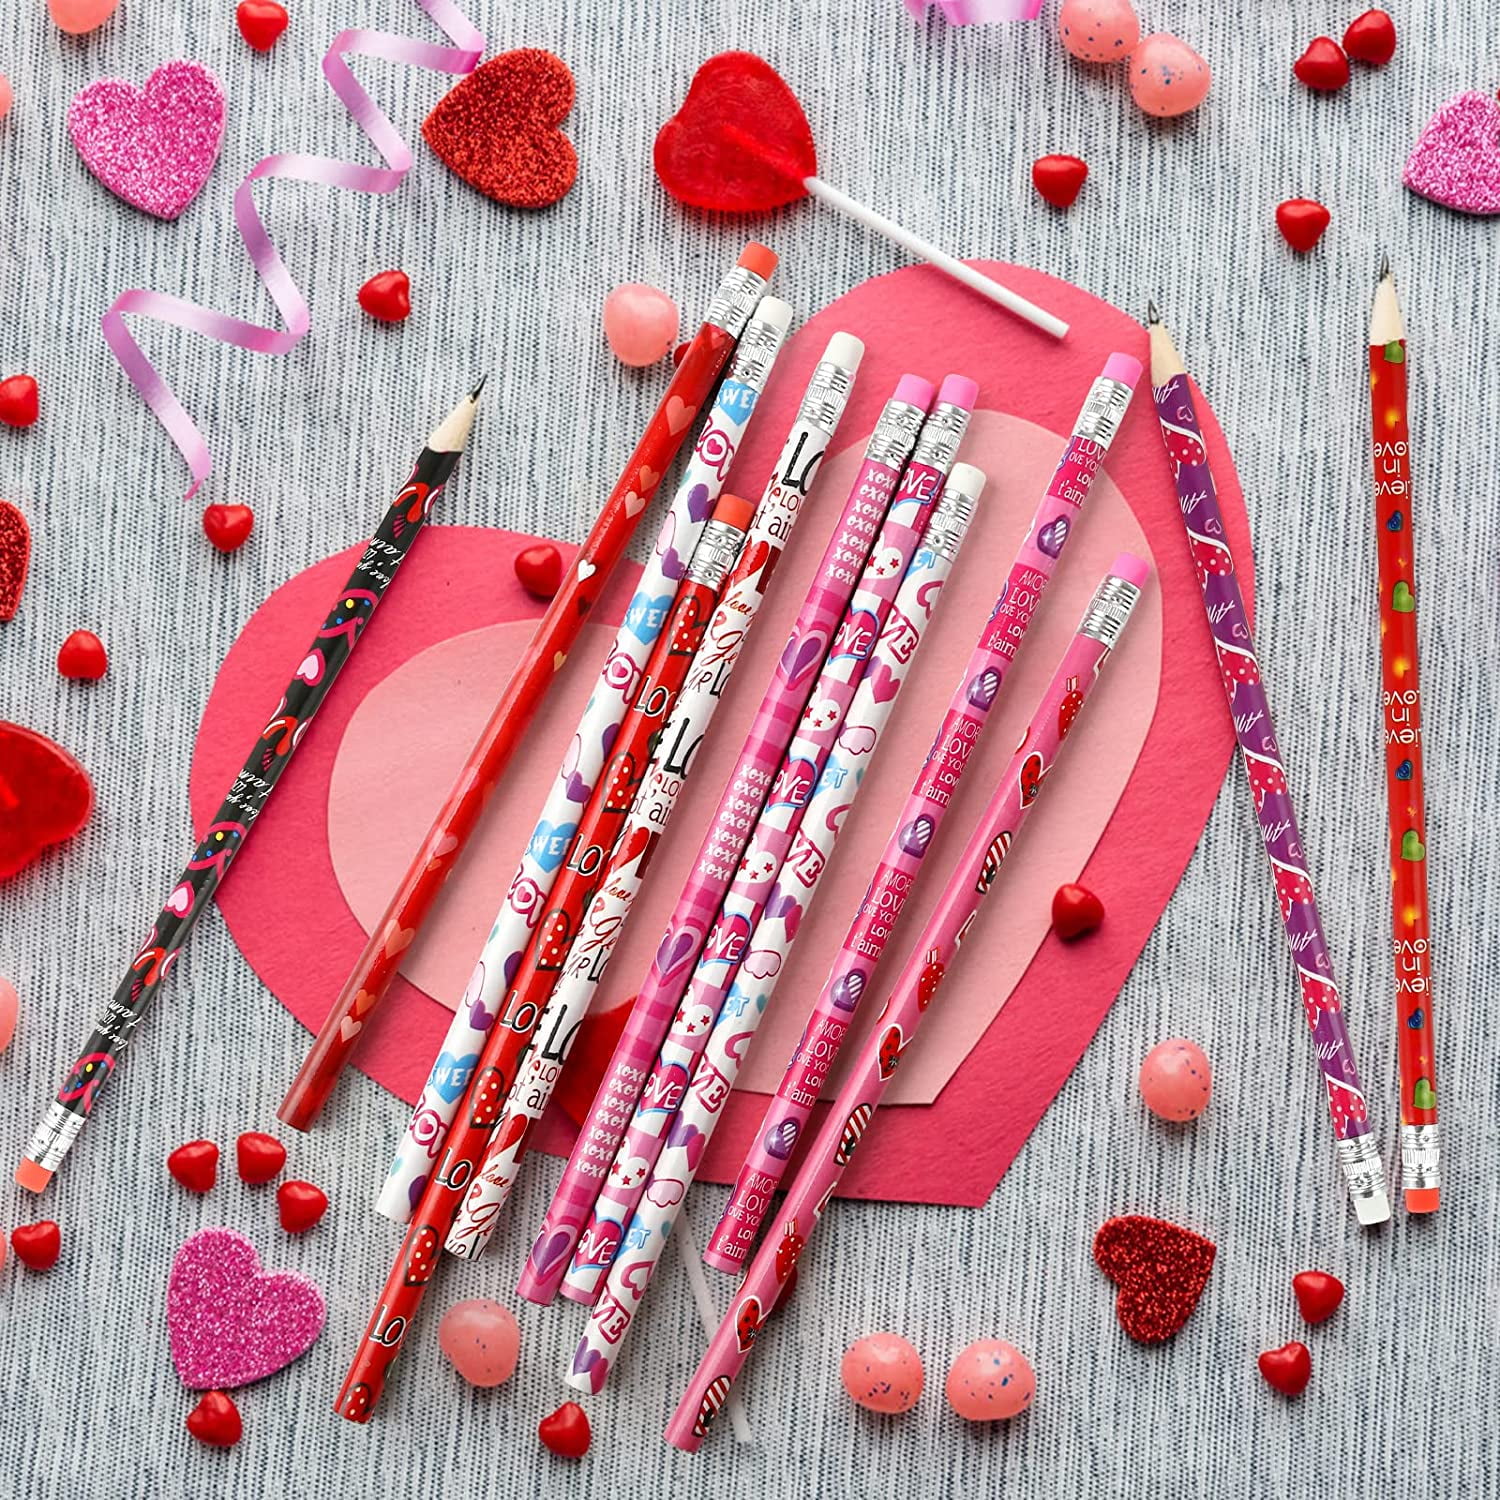  Valentines Day Pencils Valentines Wood Pencils Bulk with  Erasers Heart Shape Valentine's Day Pencils Stationary for Kids Giving  School Classroom Exchange Party Favor Supplies, 10 Styles (40) : Office  Products